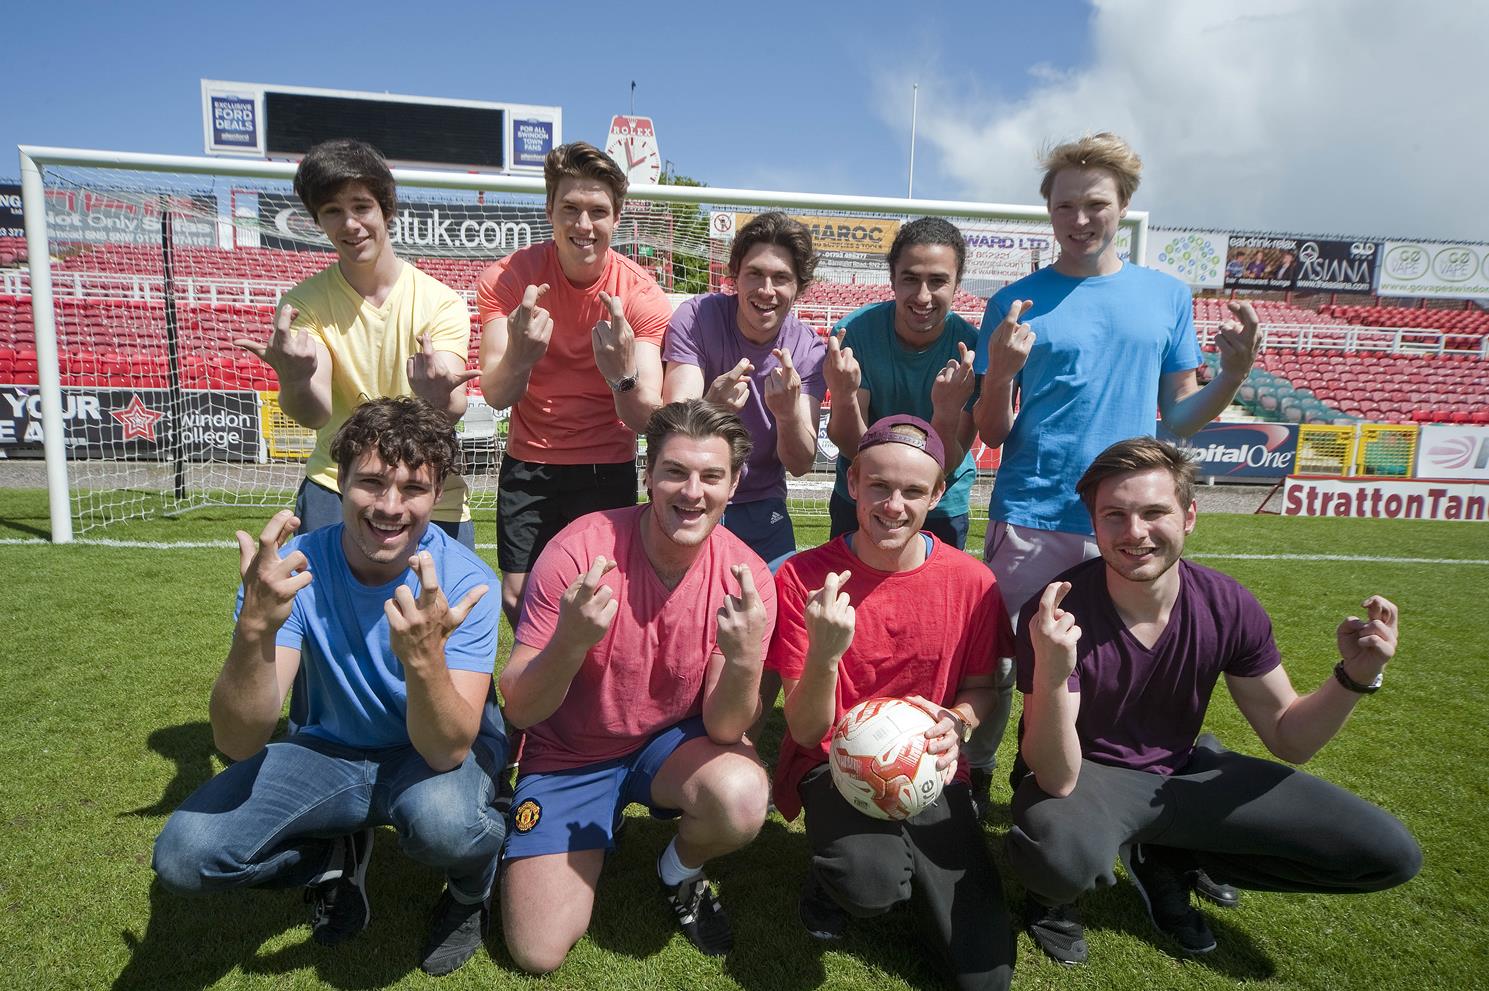 Snapped: Technicolour Team Take to County Ground for Kick About 